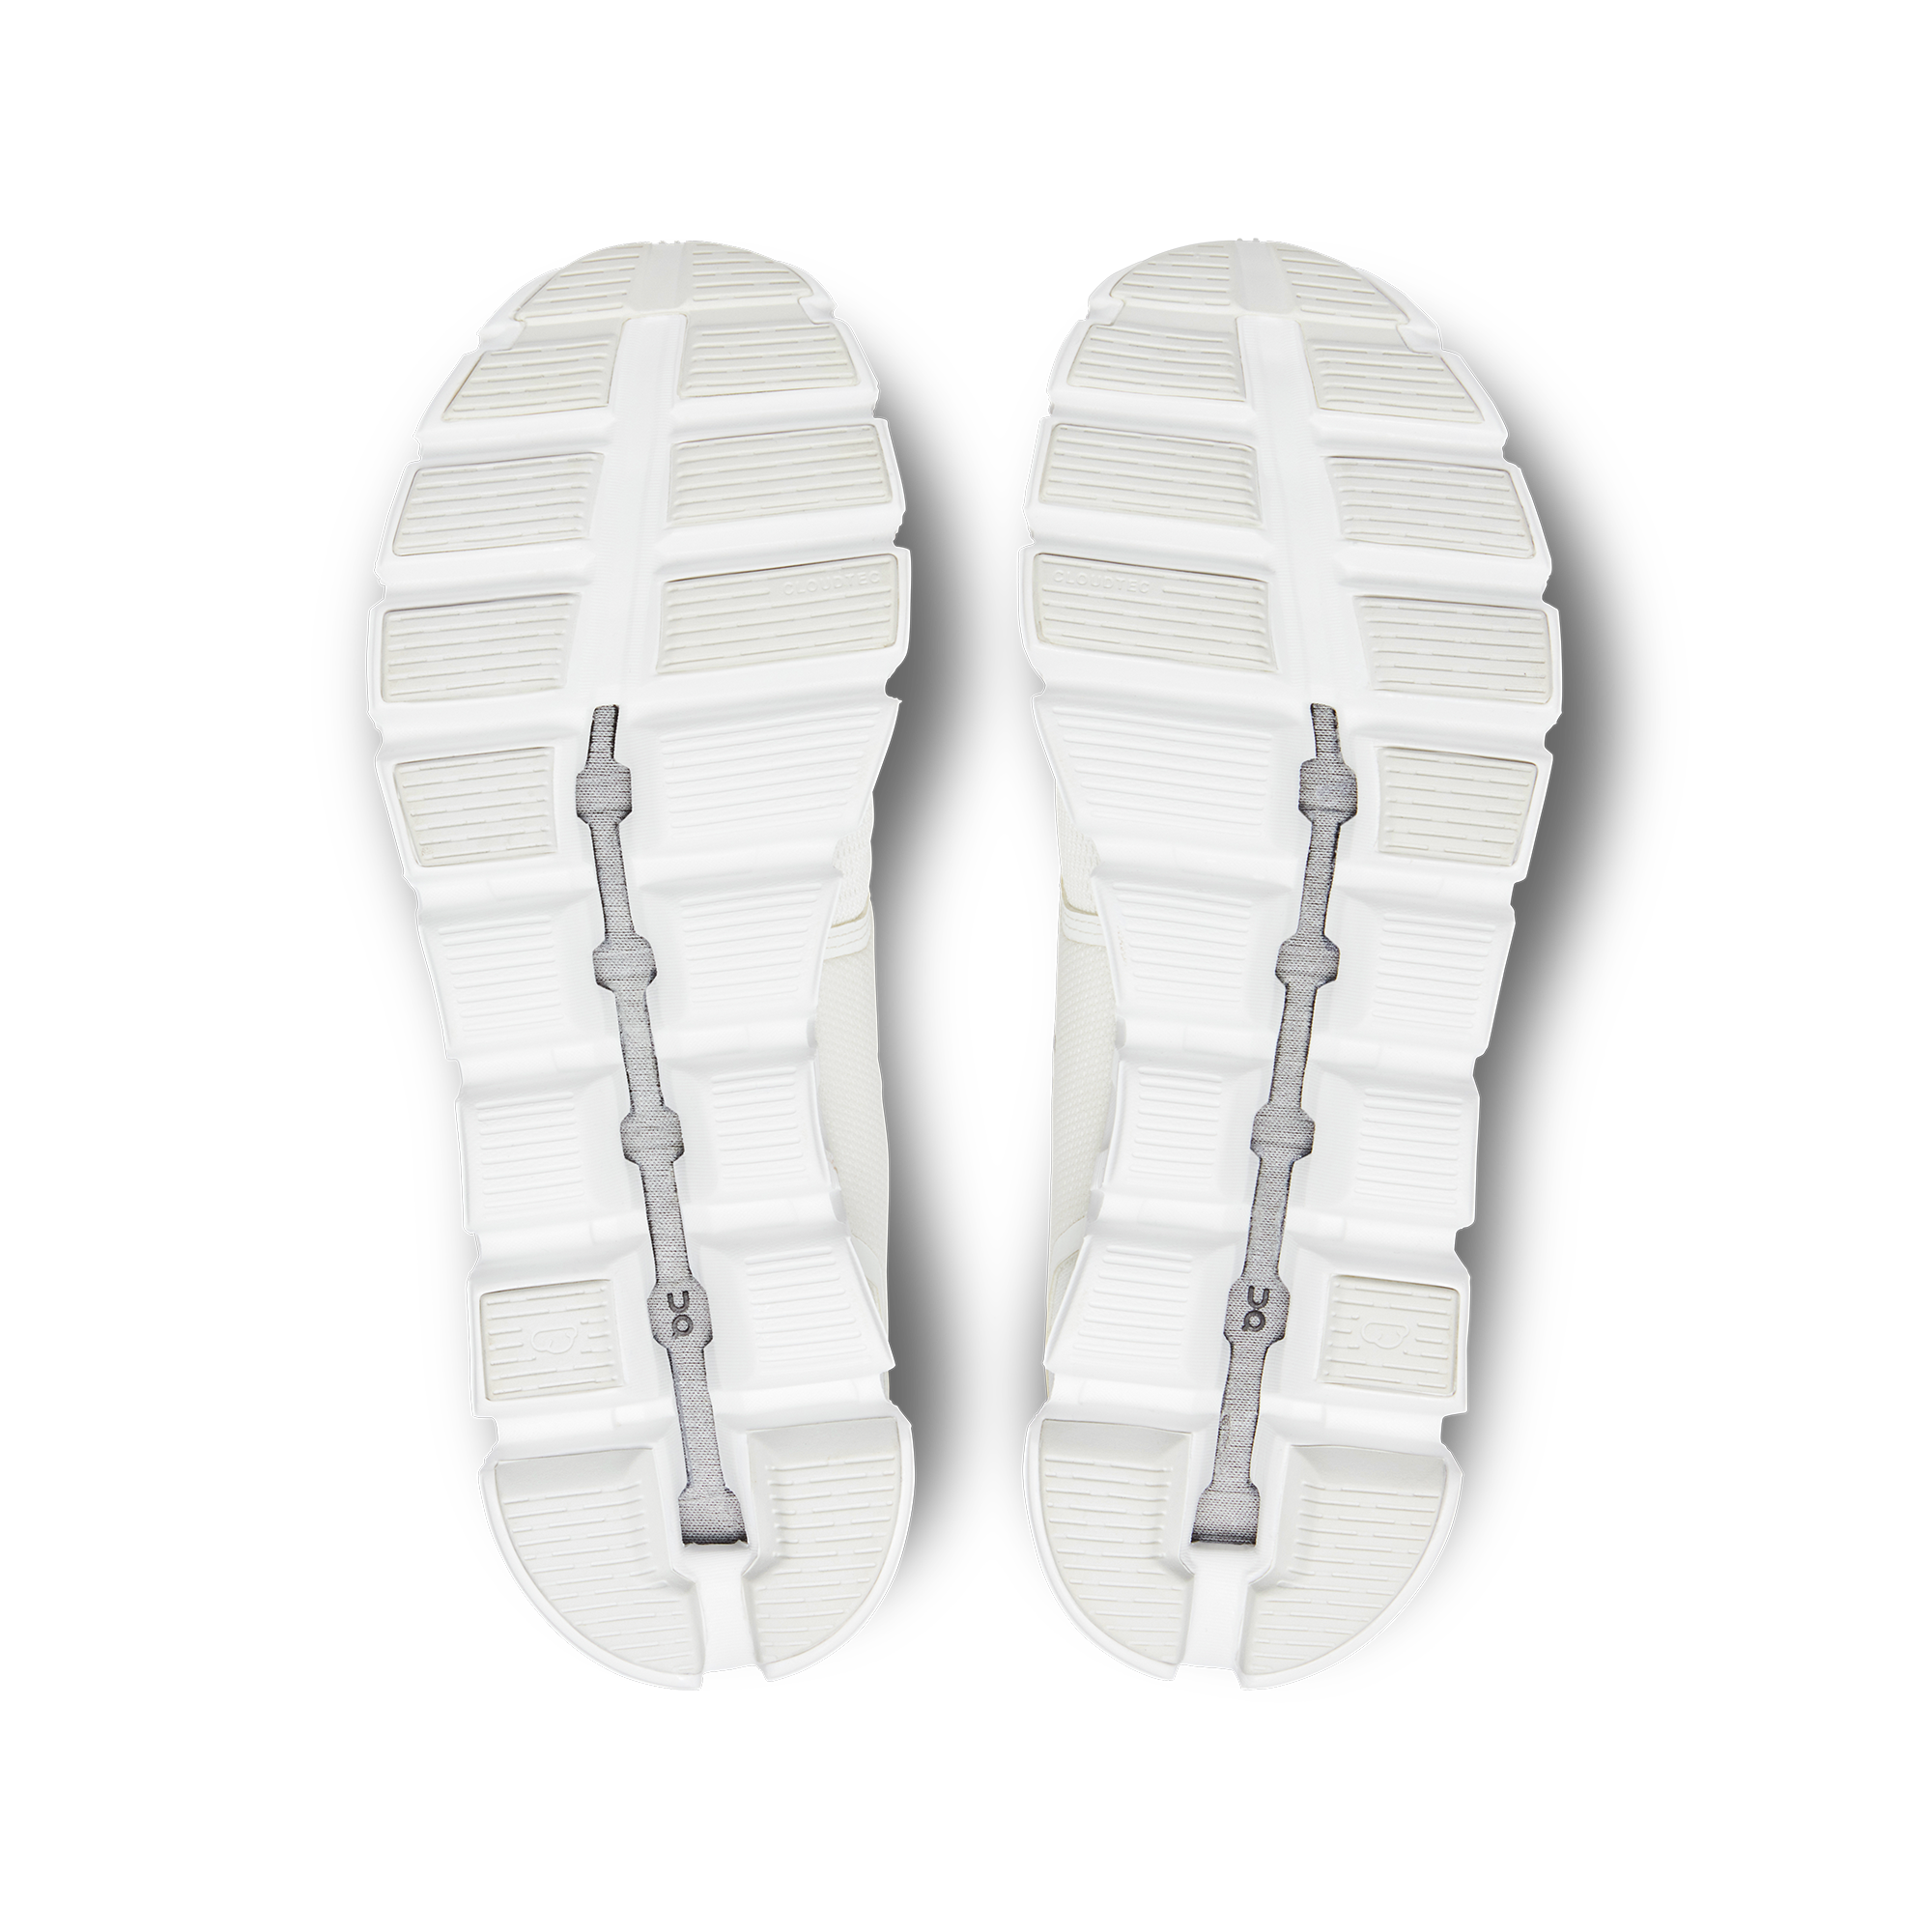 Bottom (outer sole) view of the Men's Cloud 5 by ON in the color Undyed White/White